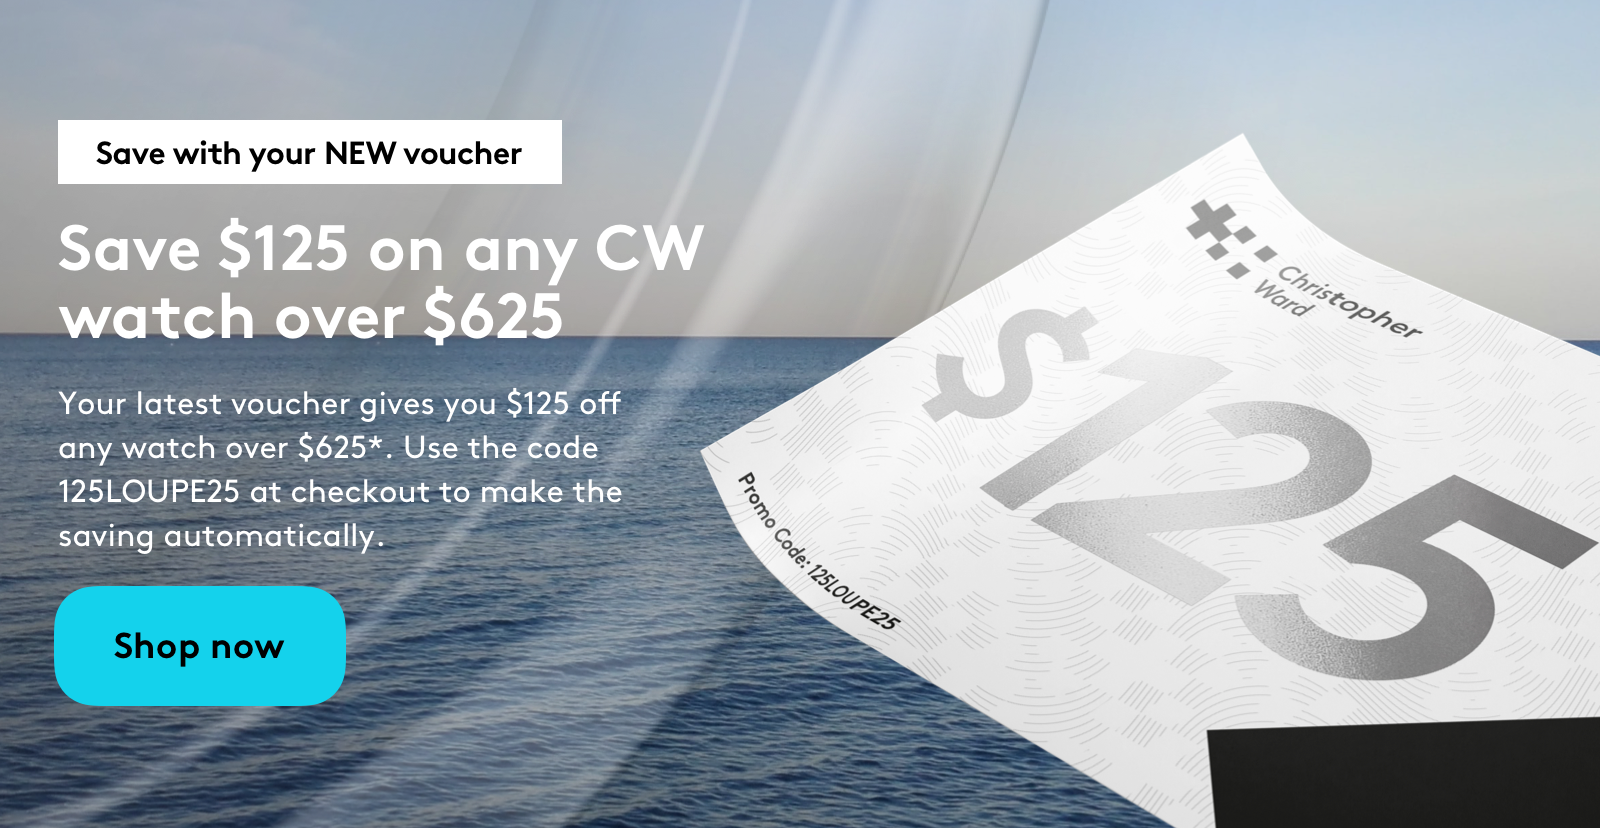 Save with your NEW Voucher